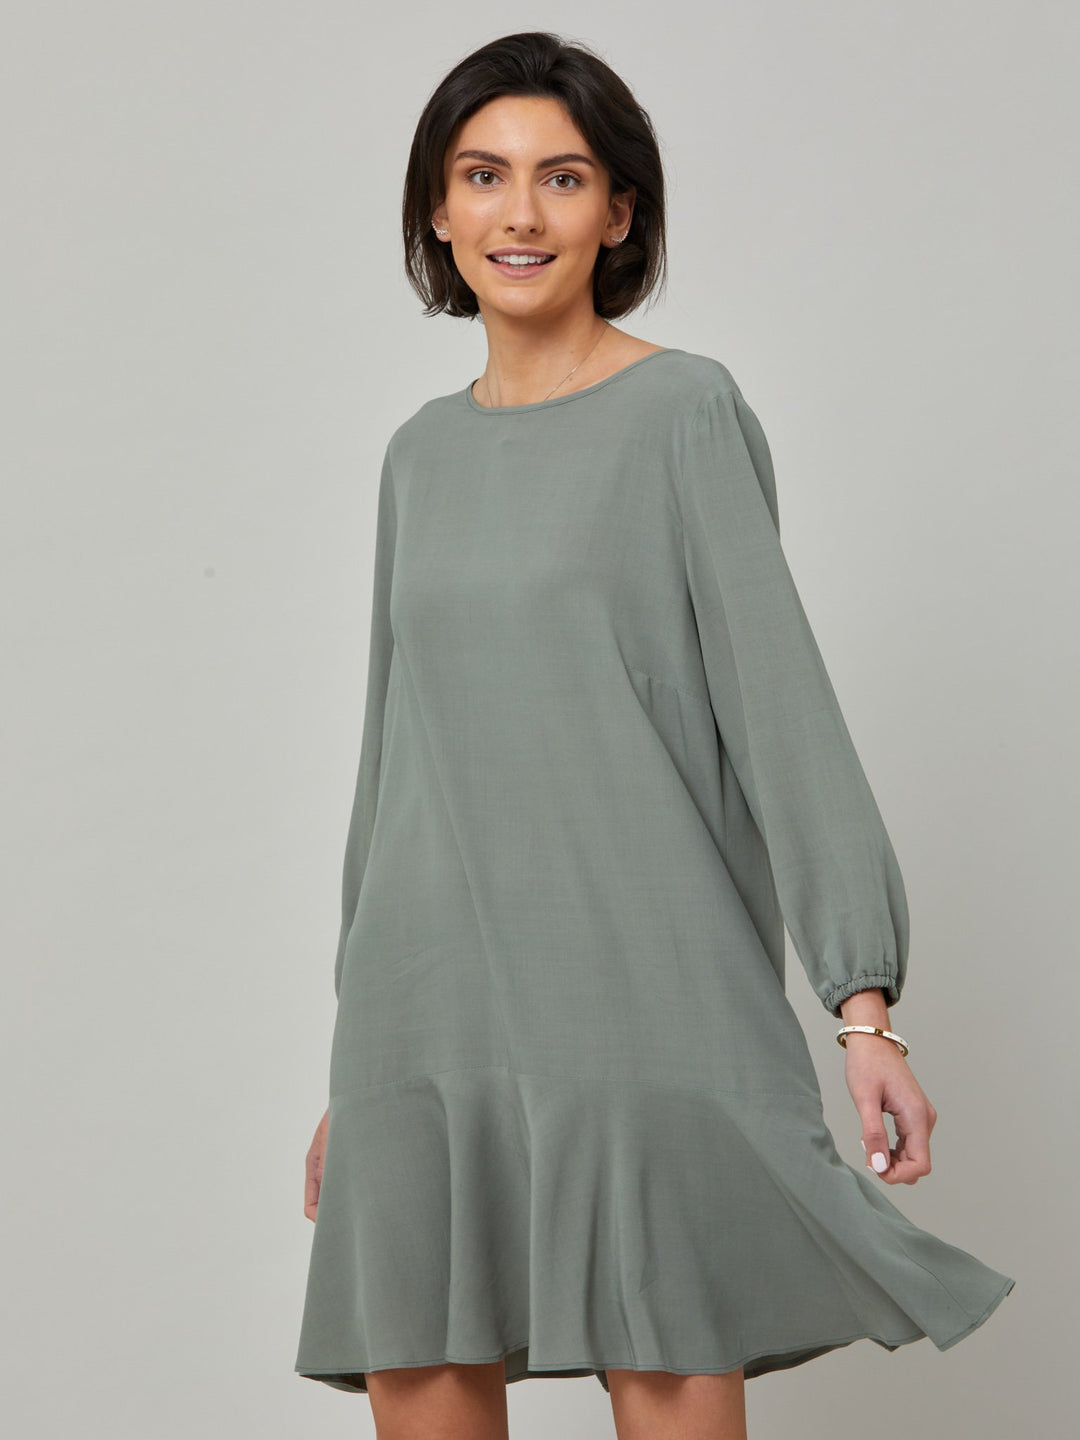 model wearing Sheila, a great everyday dress. Crafted in our fluid lichen green viscose crepe. A flirty knee-grazing shift dress with a soft elasticated cuff sleeve that falls to a deep frill hem with a jewel neckline and key-hole back detail. For everyday comfort style with trainers. Elevate your mood with this fun piece.